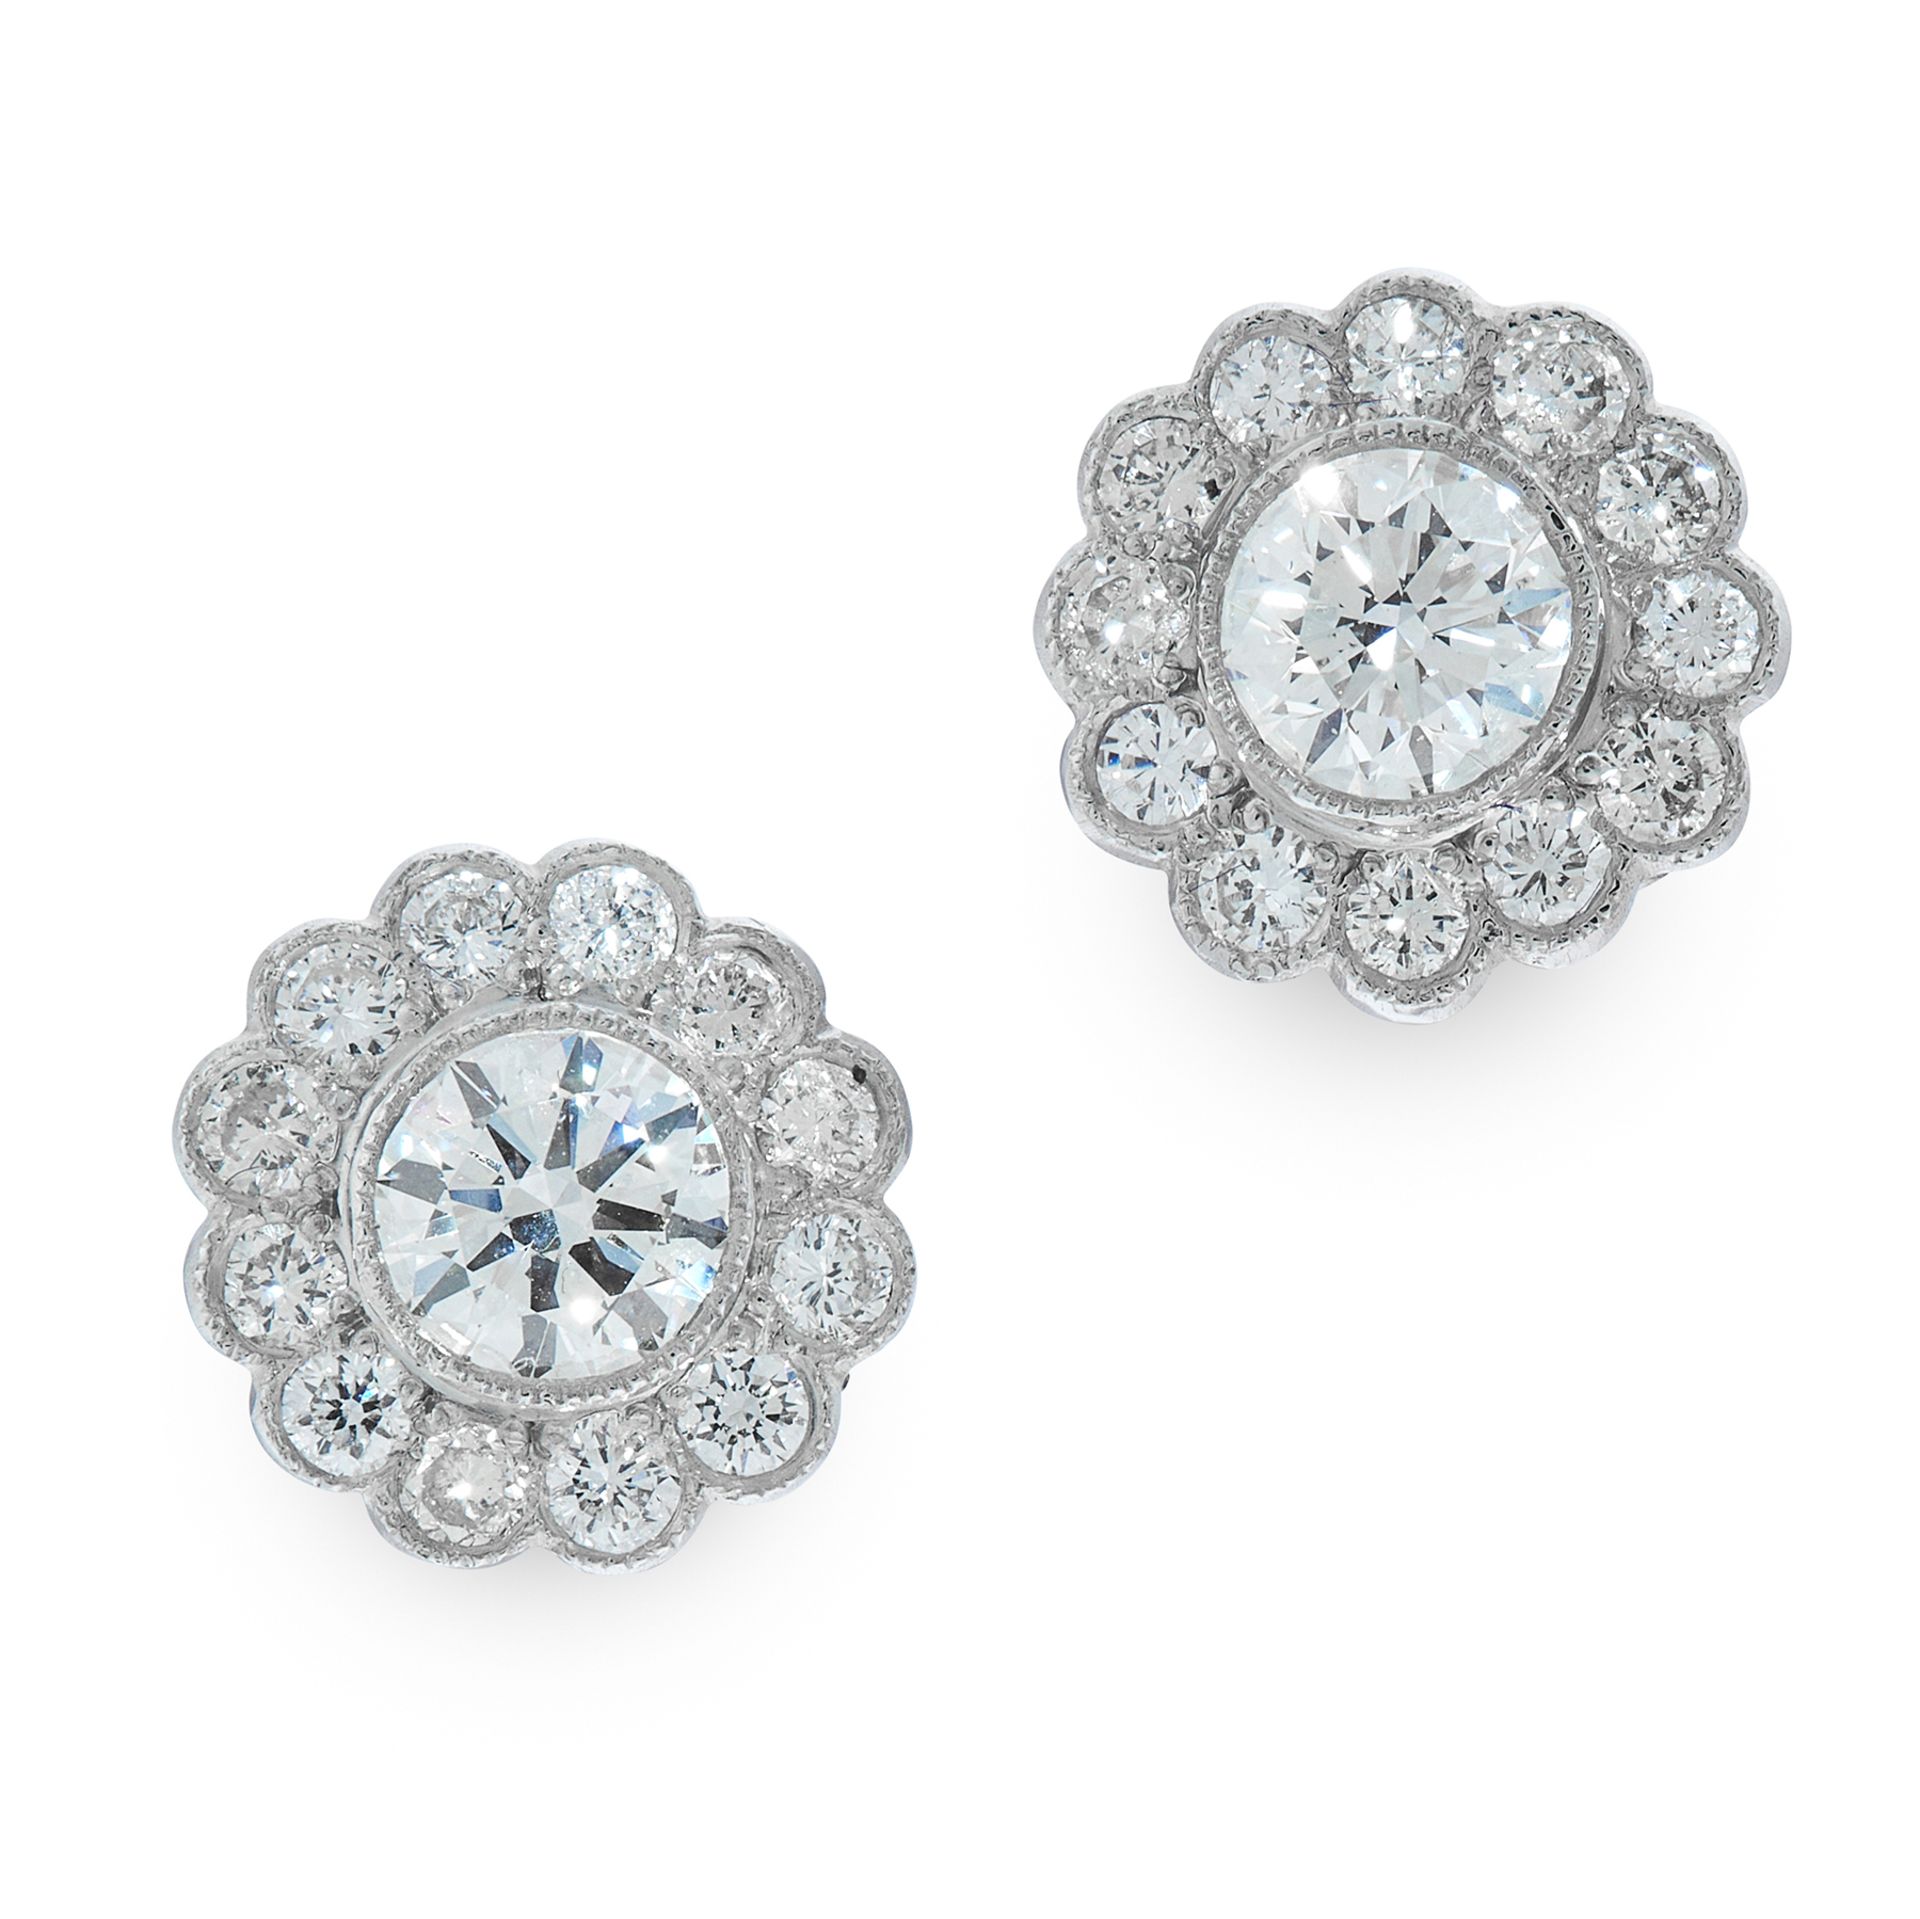 A PAIR OF DIAMOND CLUSTER STUD EARRINGS in 18ct white gold, each set with a round cut diamond within